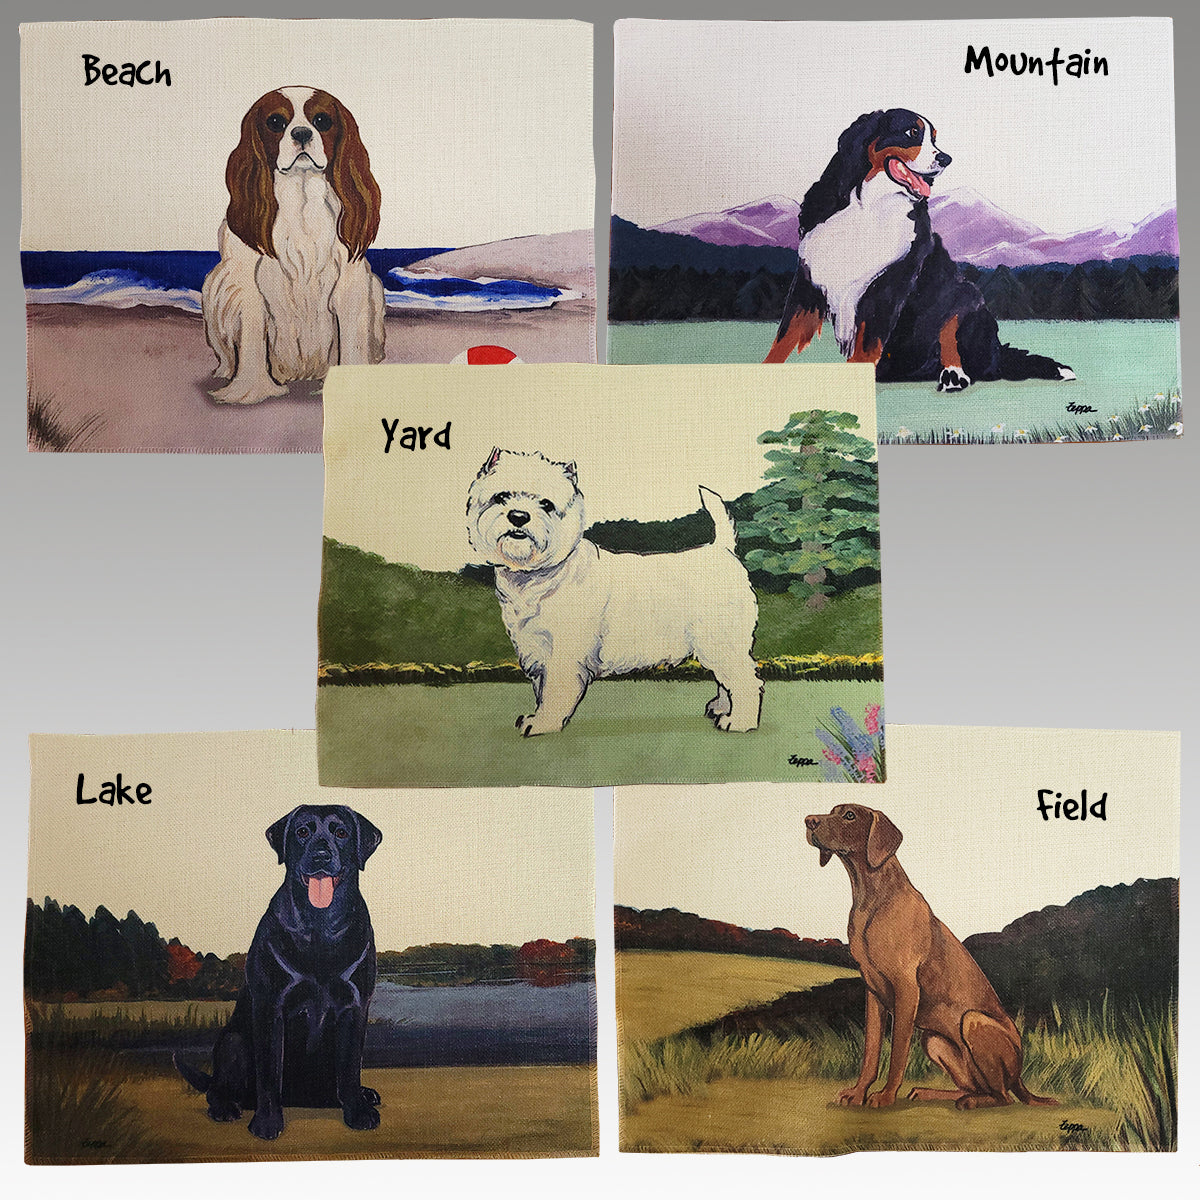 English Staffordshire Terrier Scenic Placemats